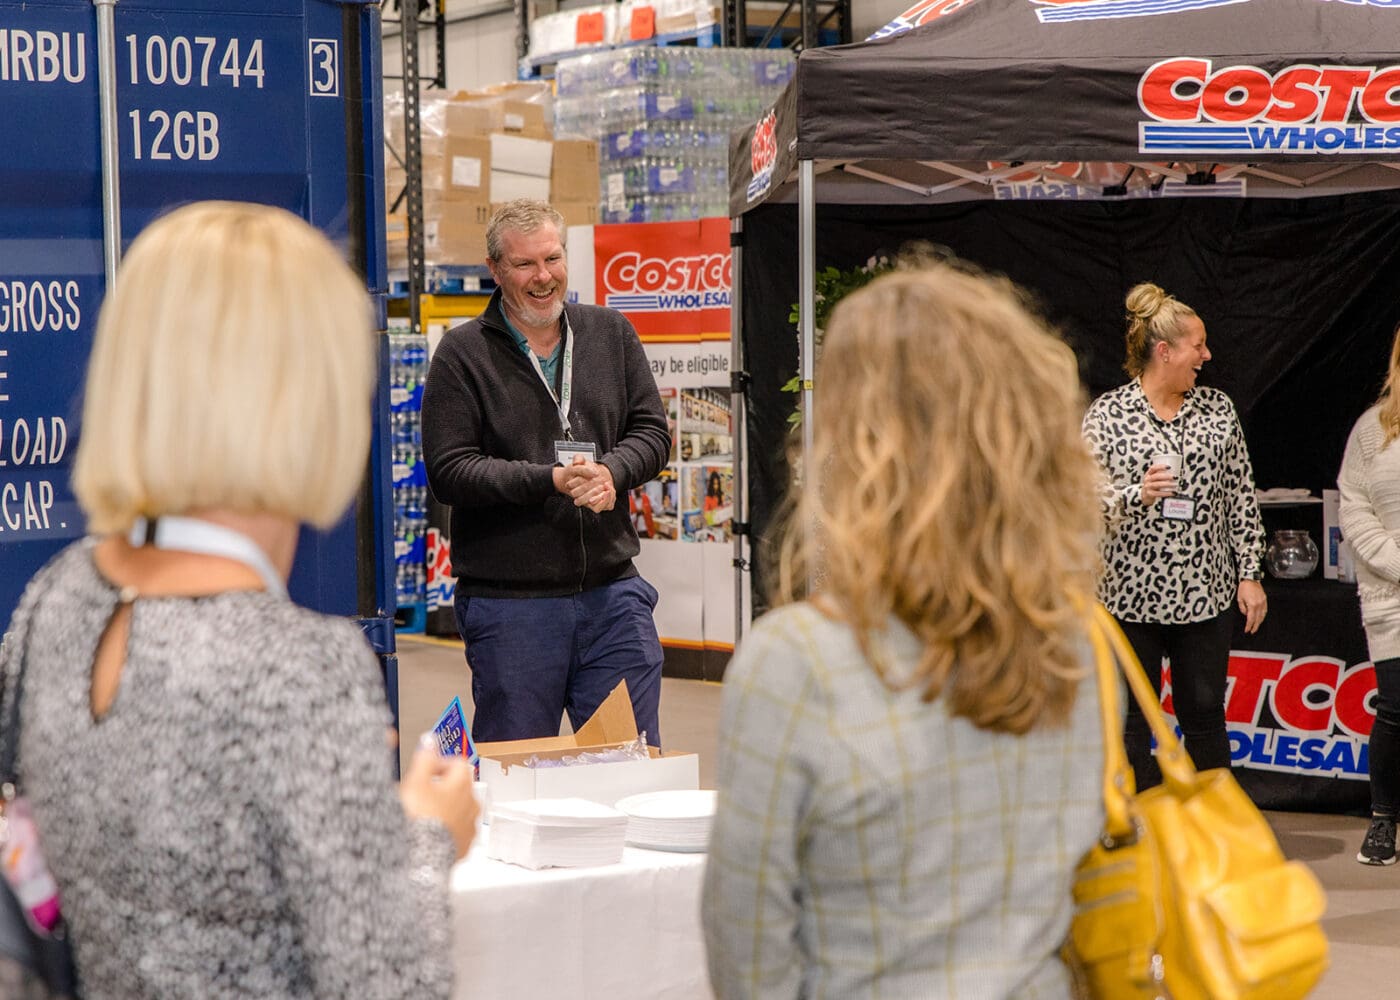 Zokit Networking Costco Cardiff, Business Networking